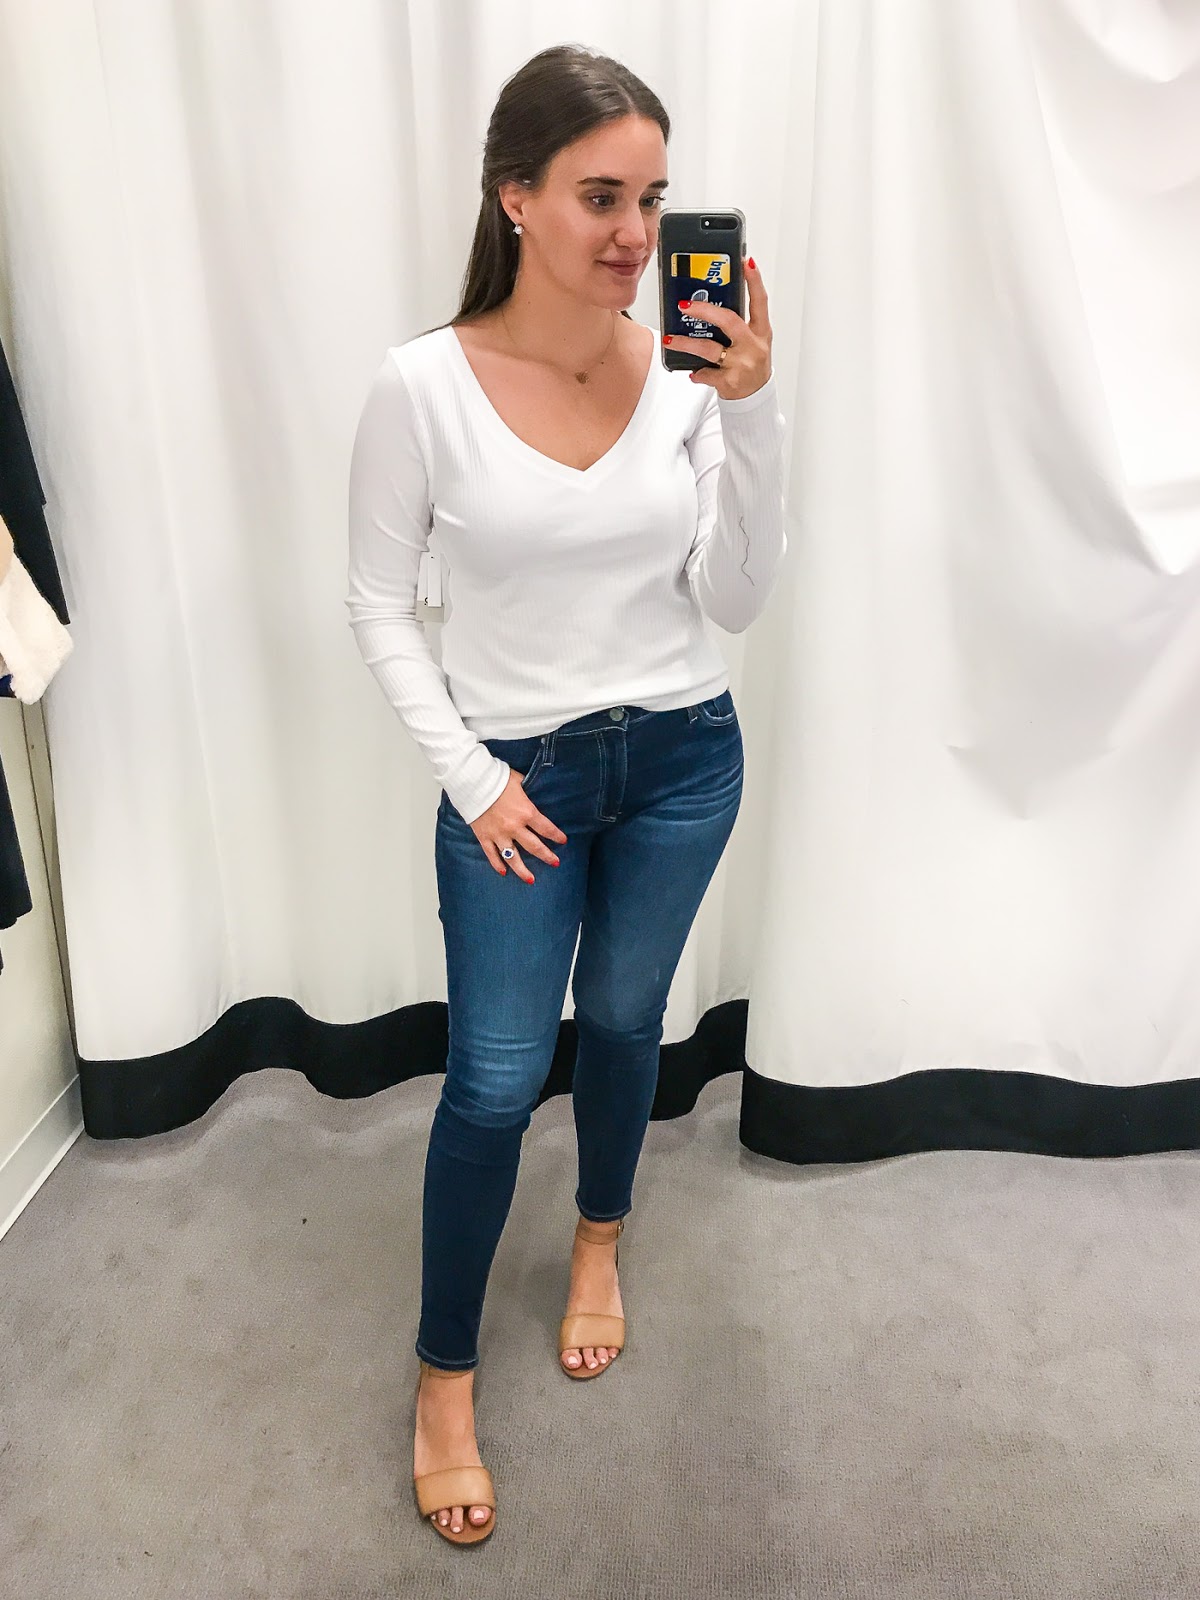 Nordstrom Anniversary Dressing Room Try On featured by popular New York fashion blogger, Covering the Bases